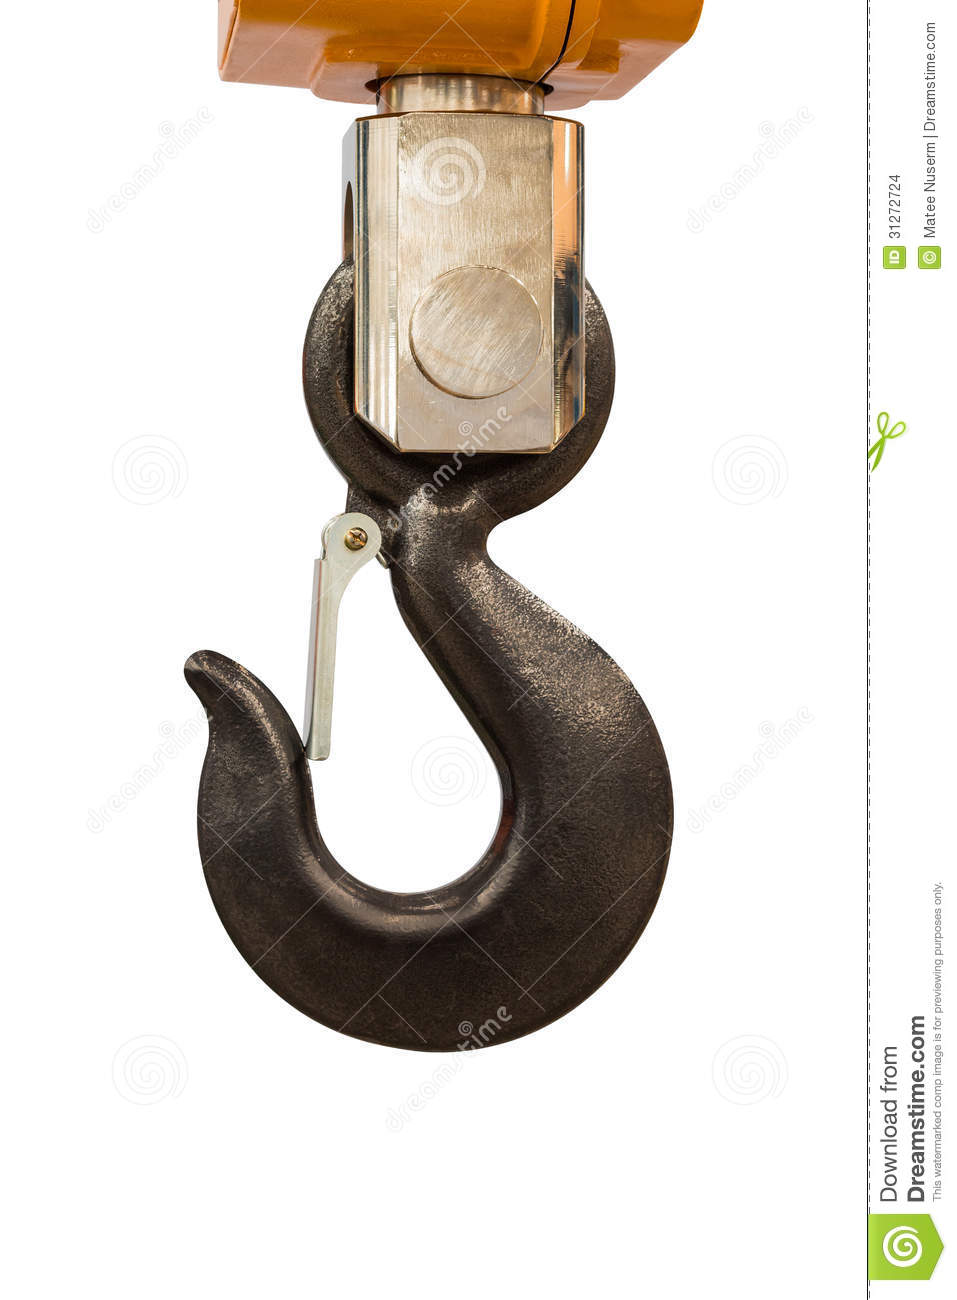 Industrial Hook Stock Images   Image  31272724